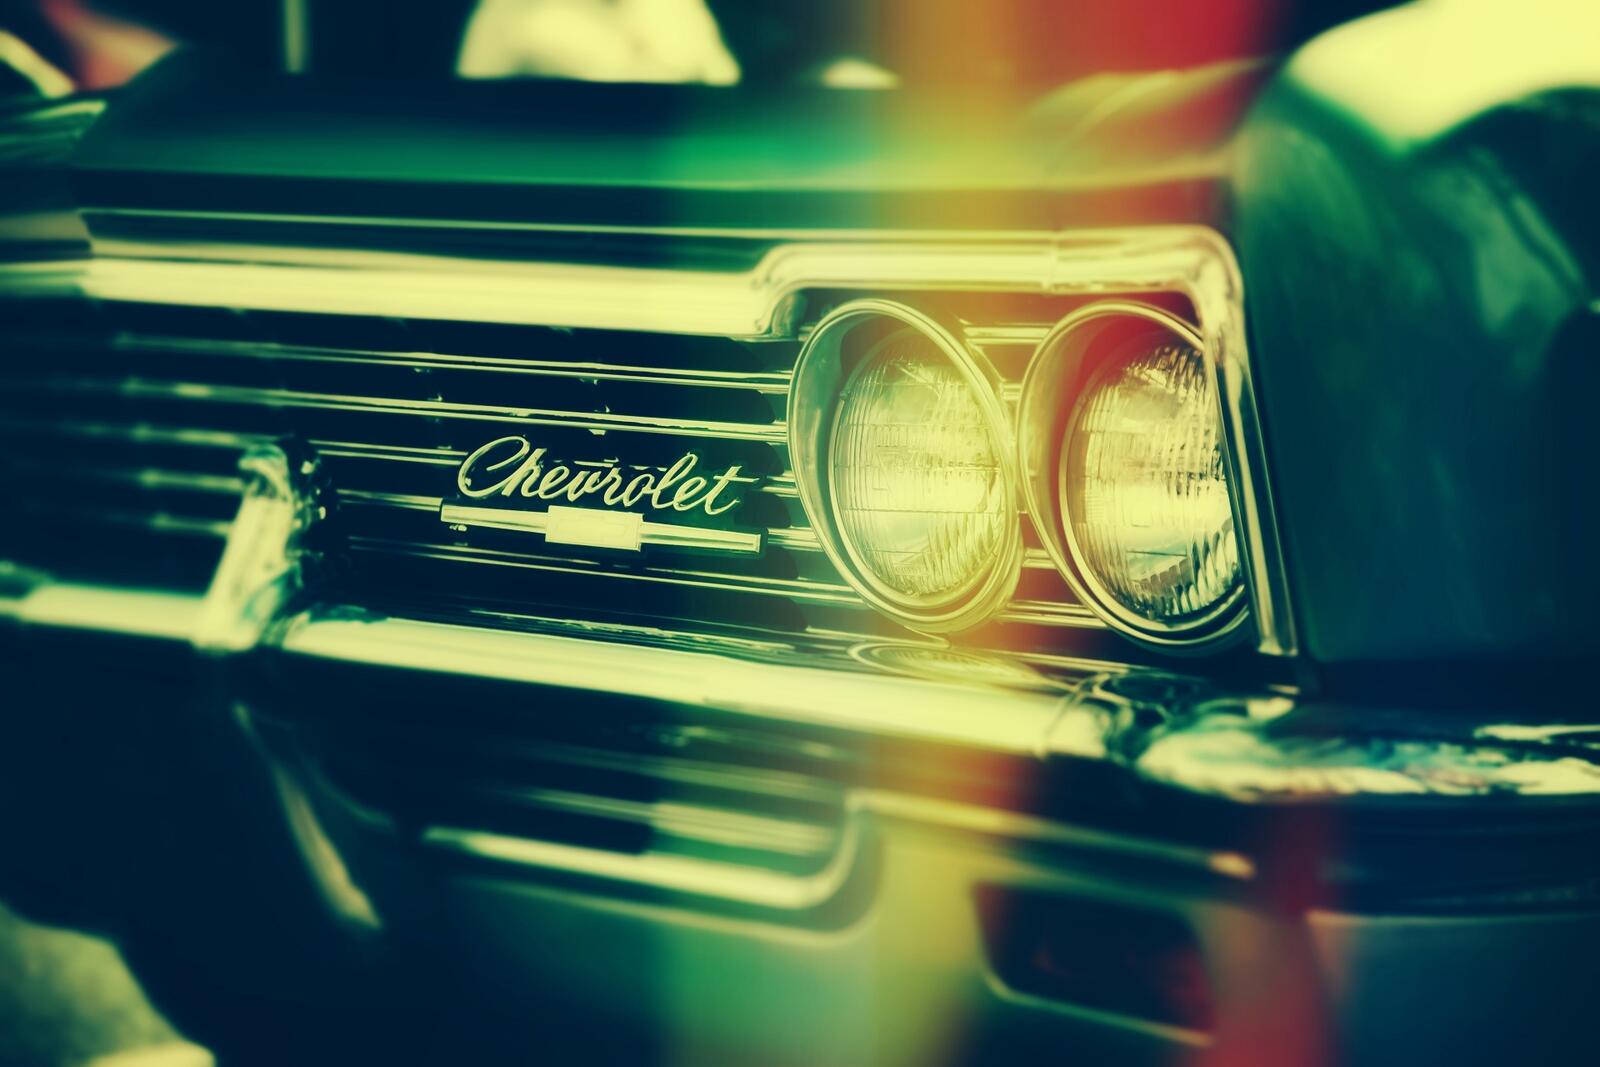 Wallpapers chevrolet retro front view automobiles on the desktop